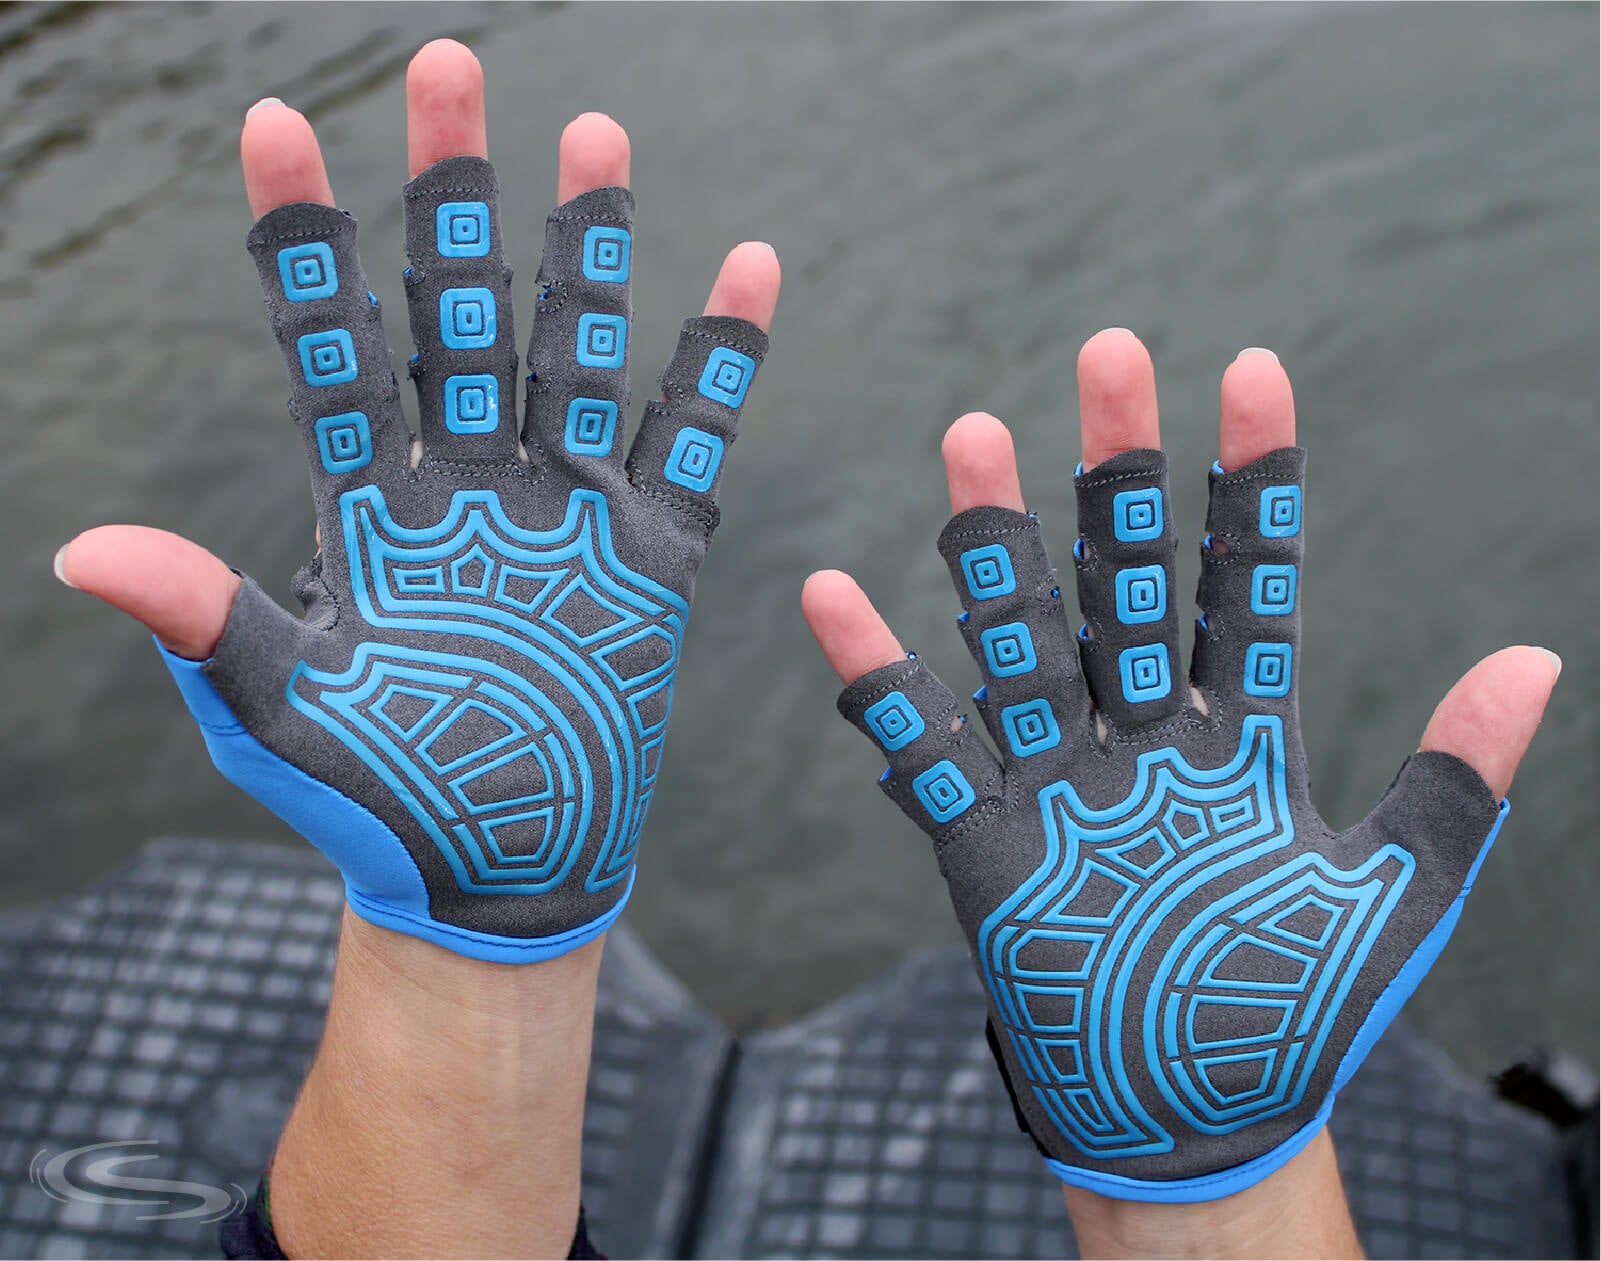 How To Find the Best Rowing Gloves To Protect Your Hands